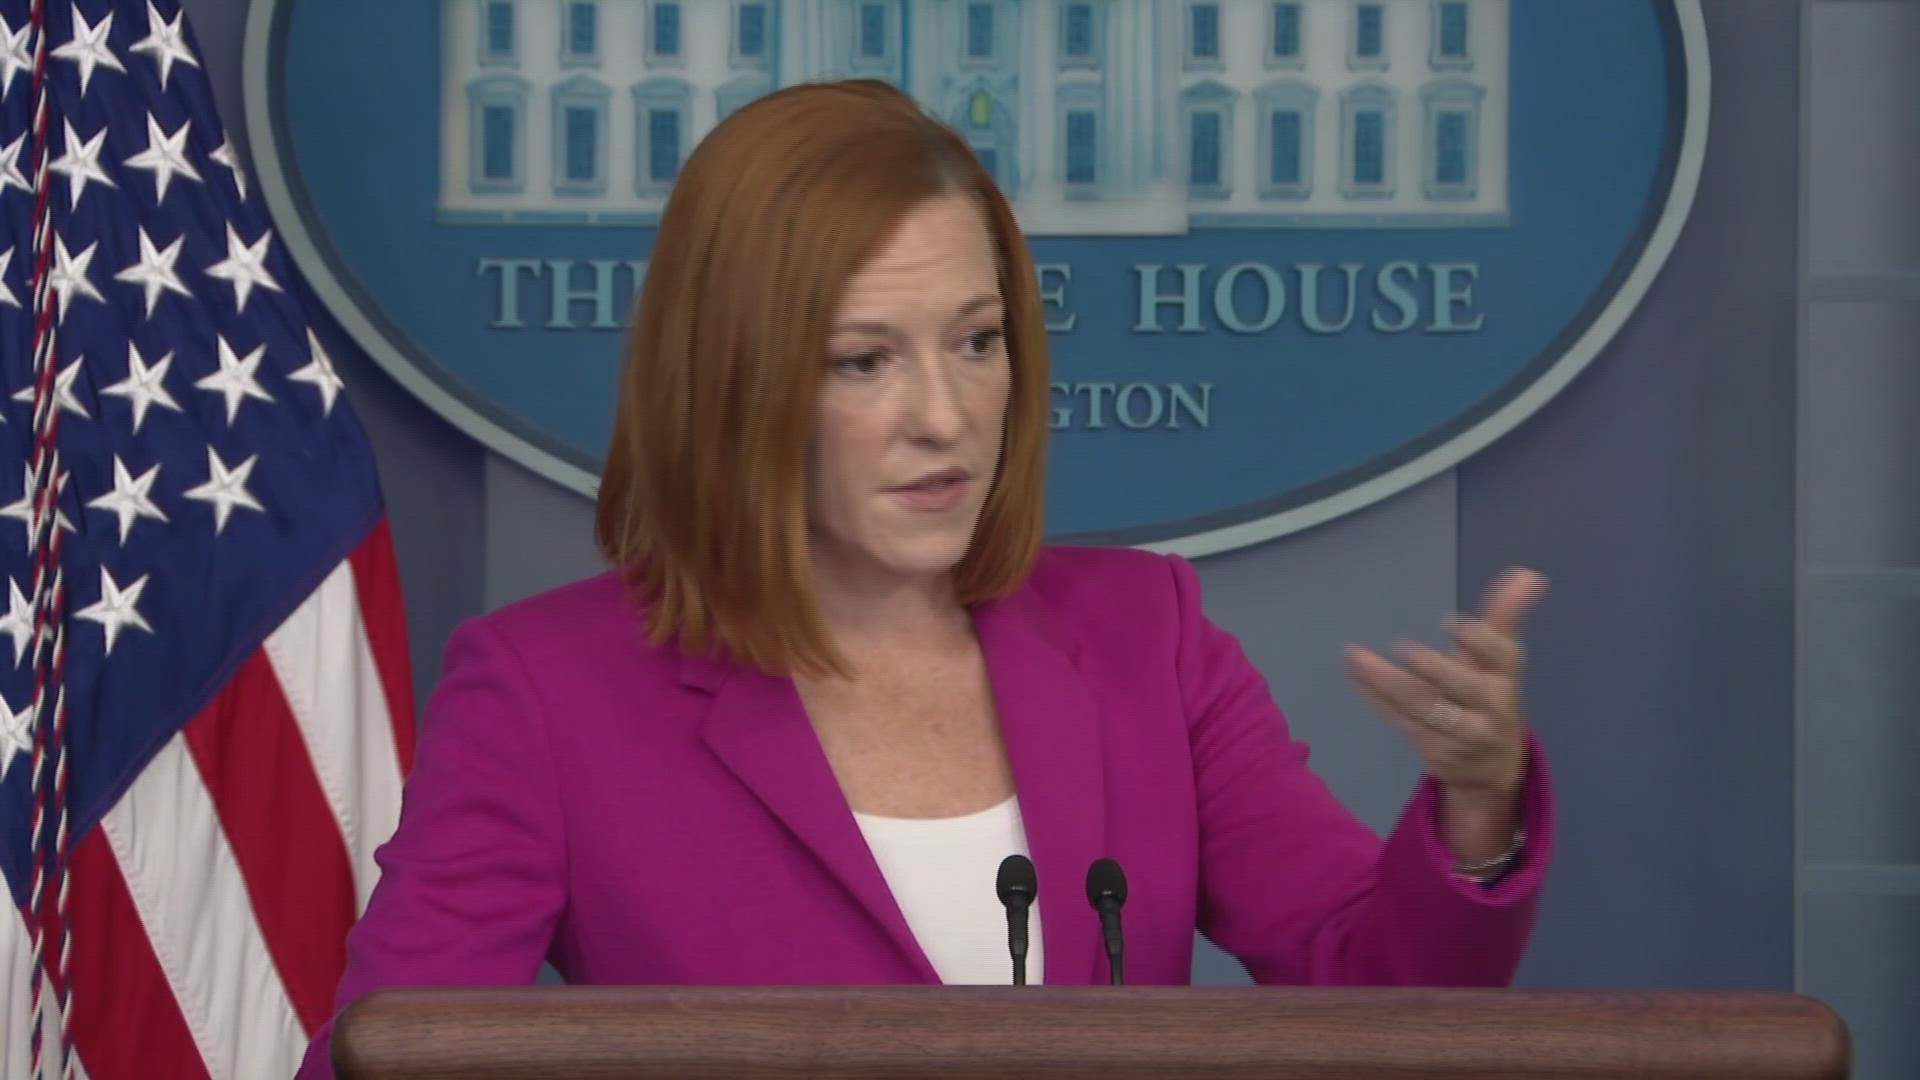 At a news briefing Thursday, White House spokesperson Jen Psaki discussed the images of border agents on horeseback.